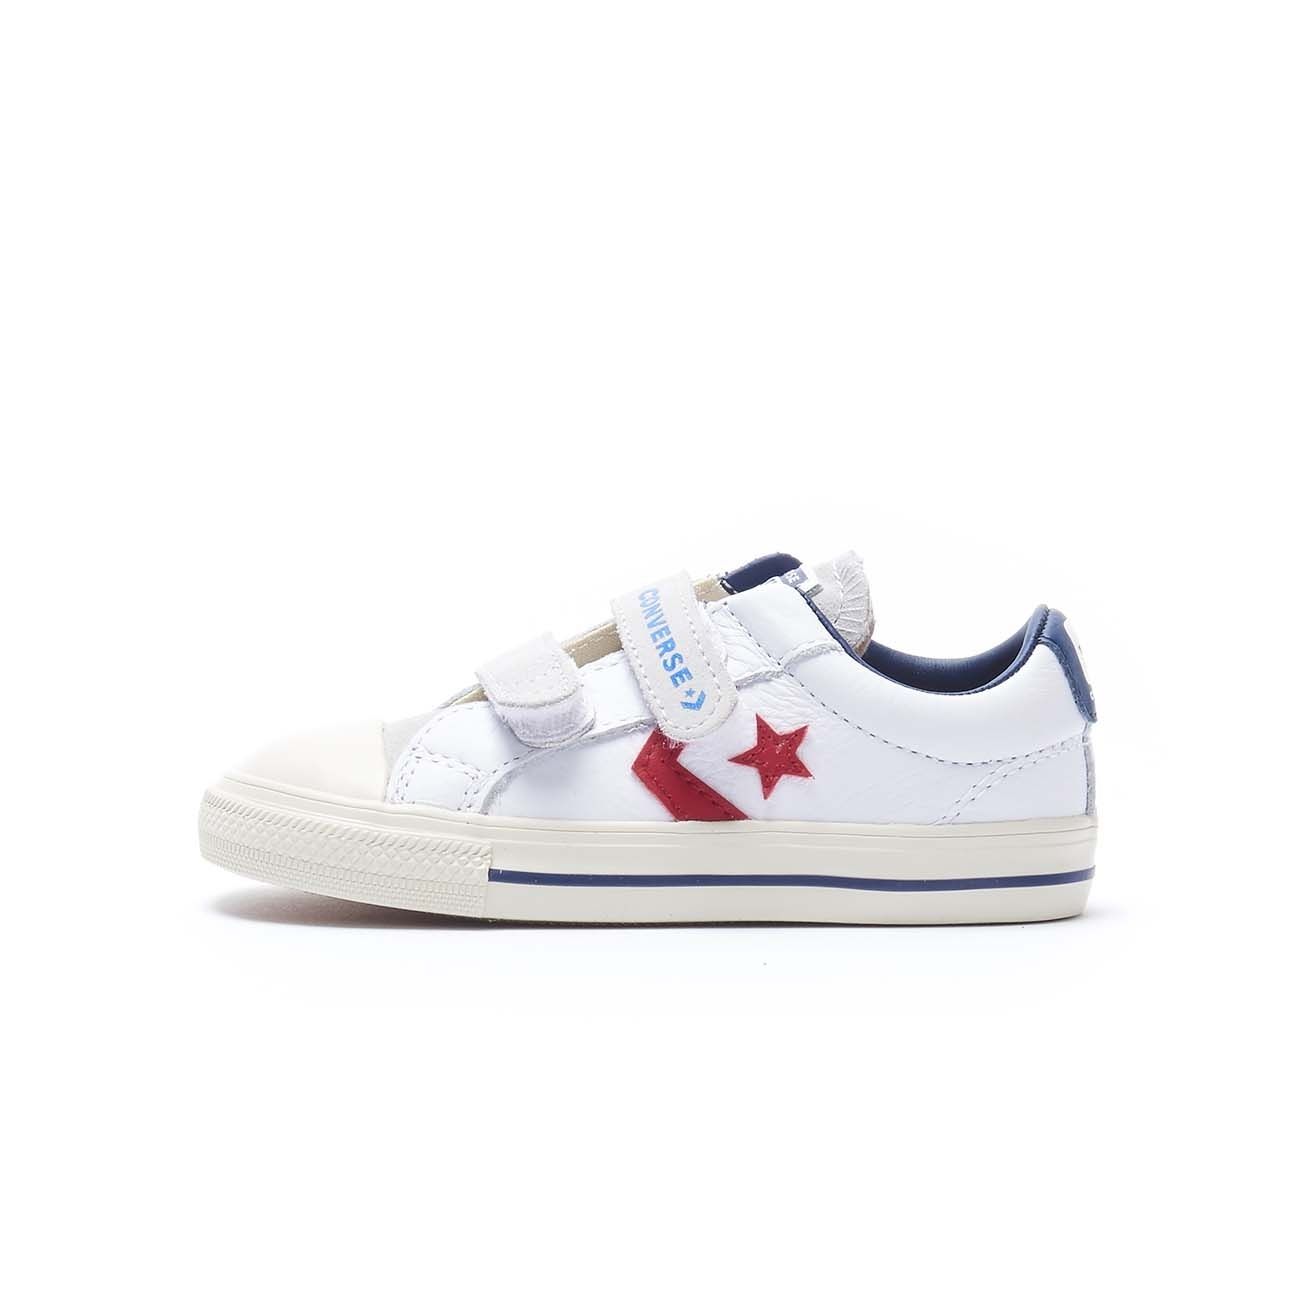 Converse Player 2v Ox Outlet 56% | maikyaulaw.com